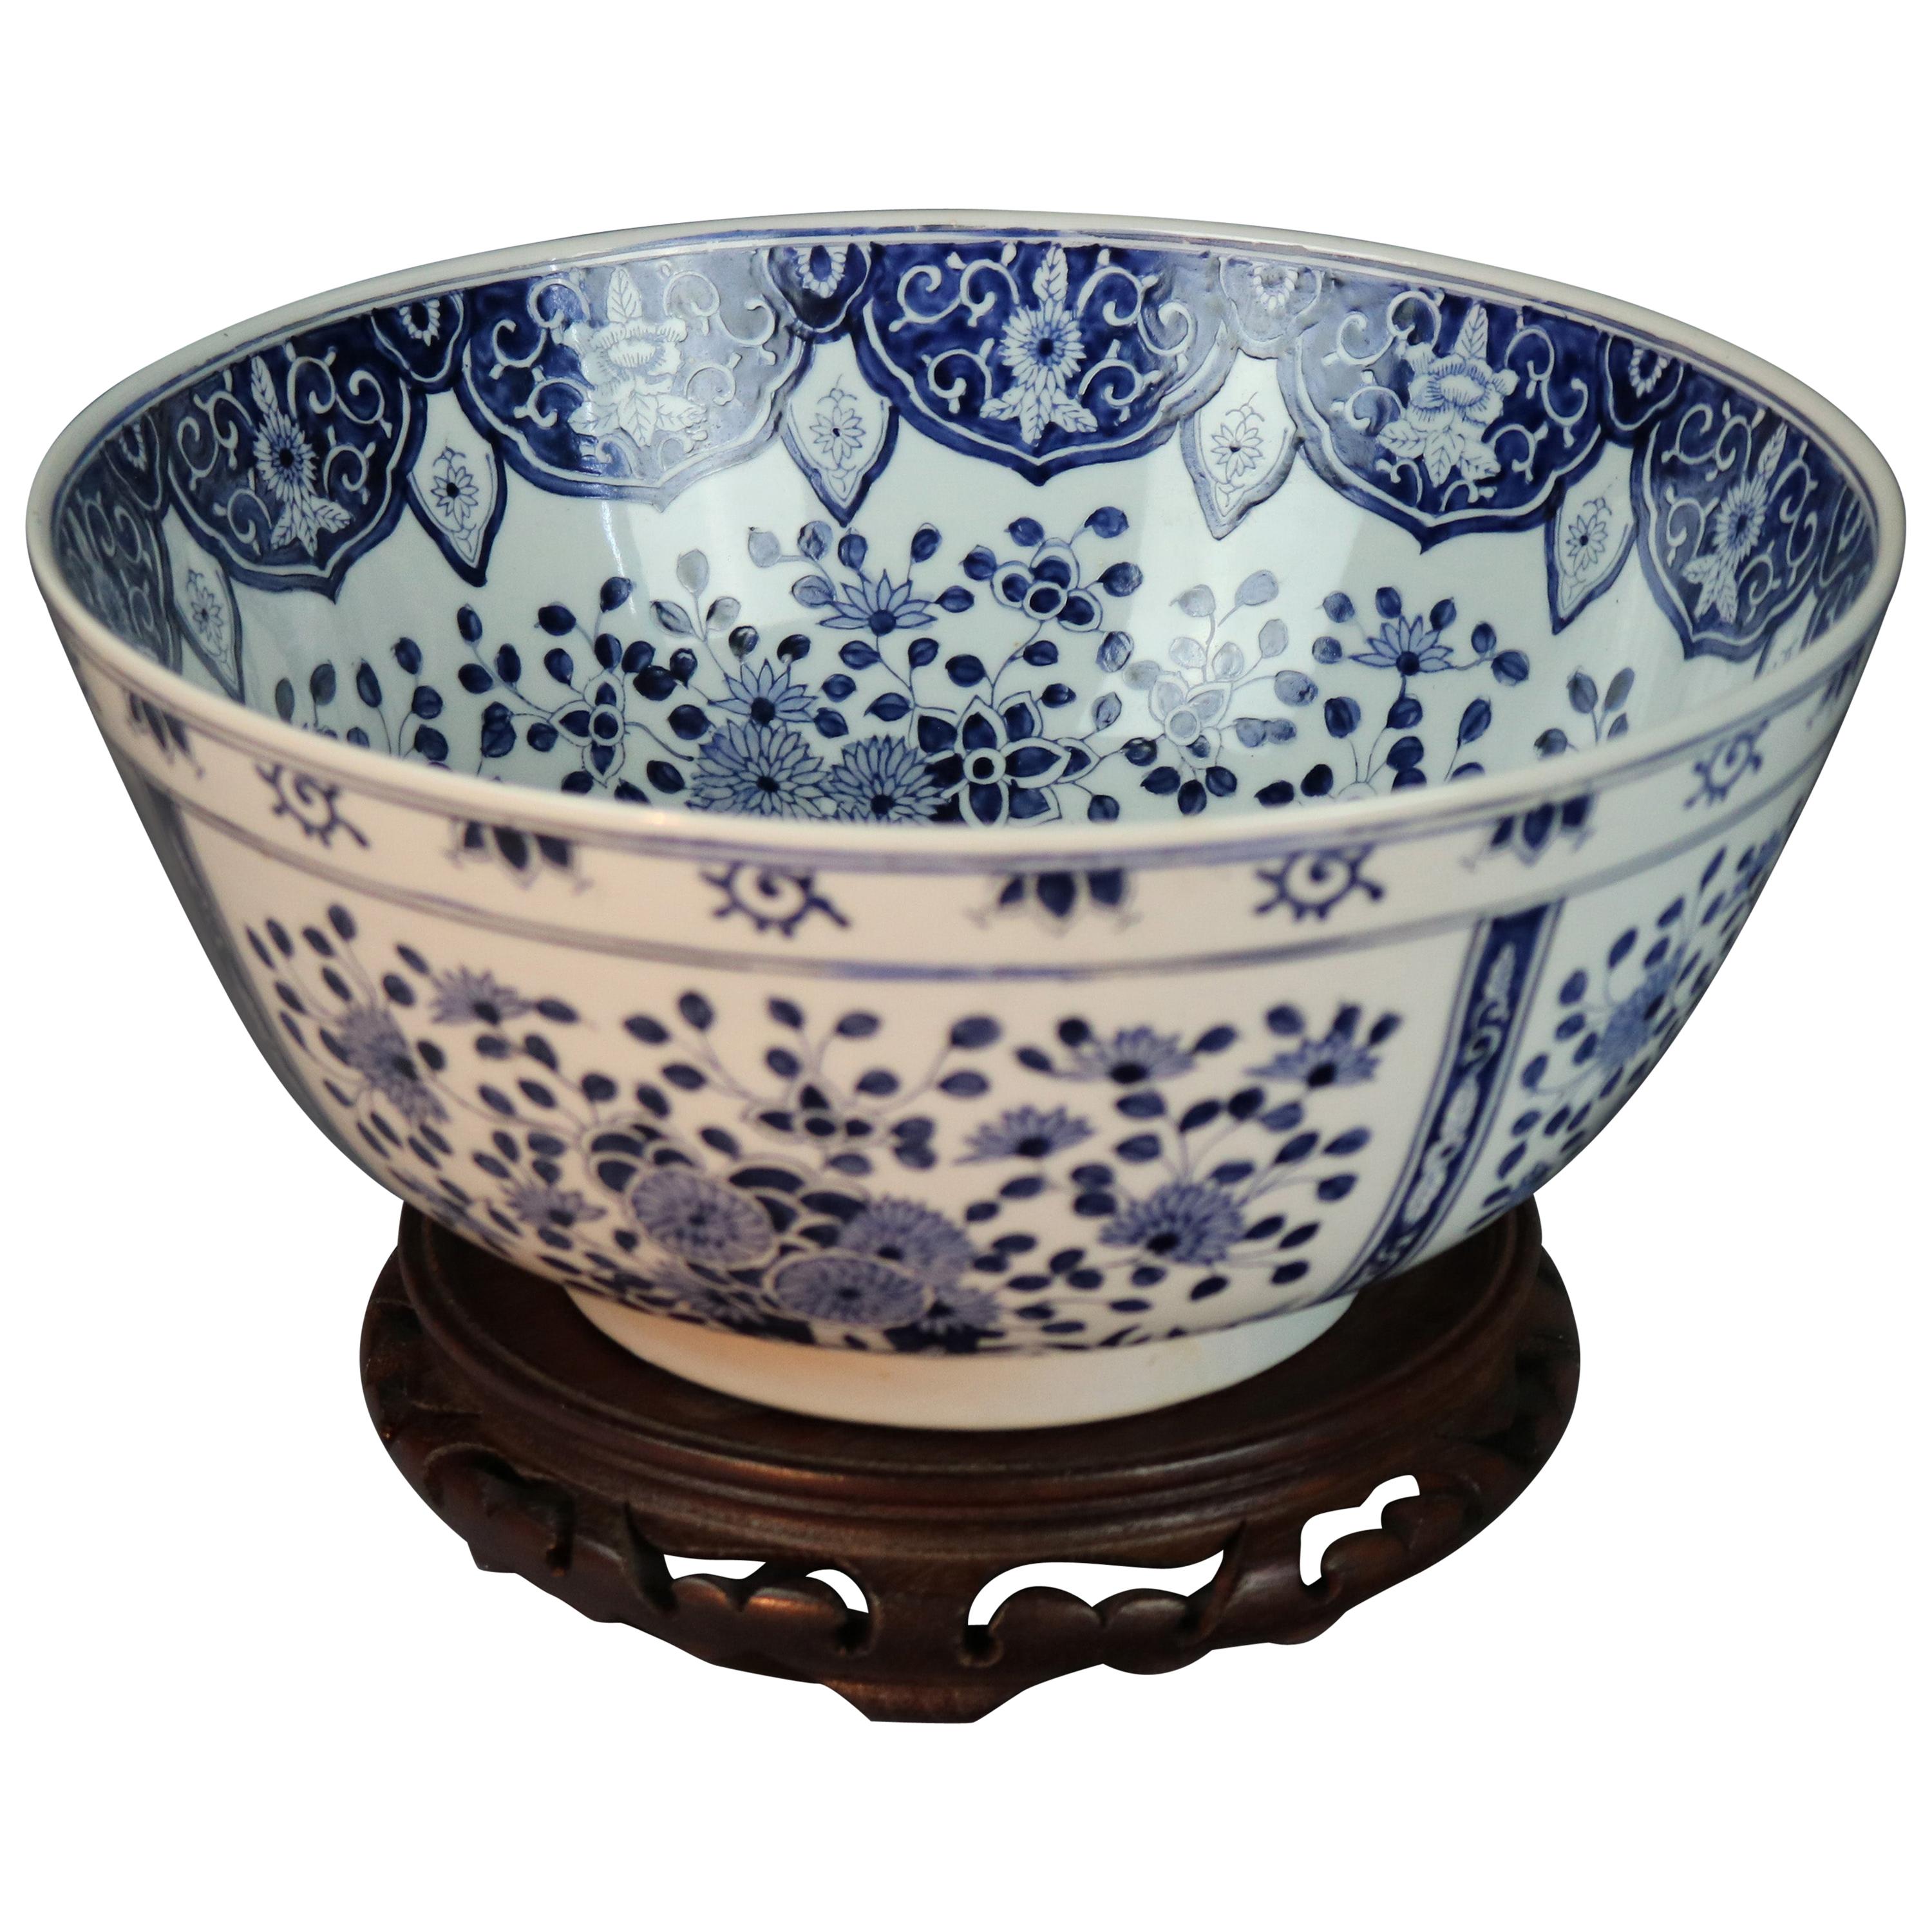 Antique Blue and White Japanese Porcelain Bowl with Hardwood Stand, 20th Century